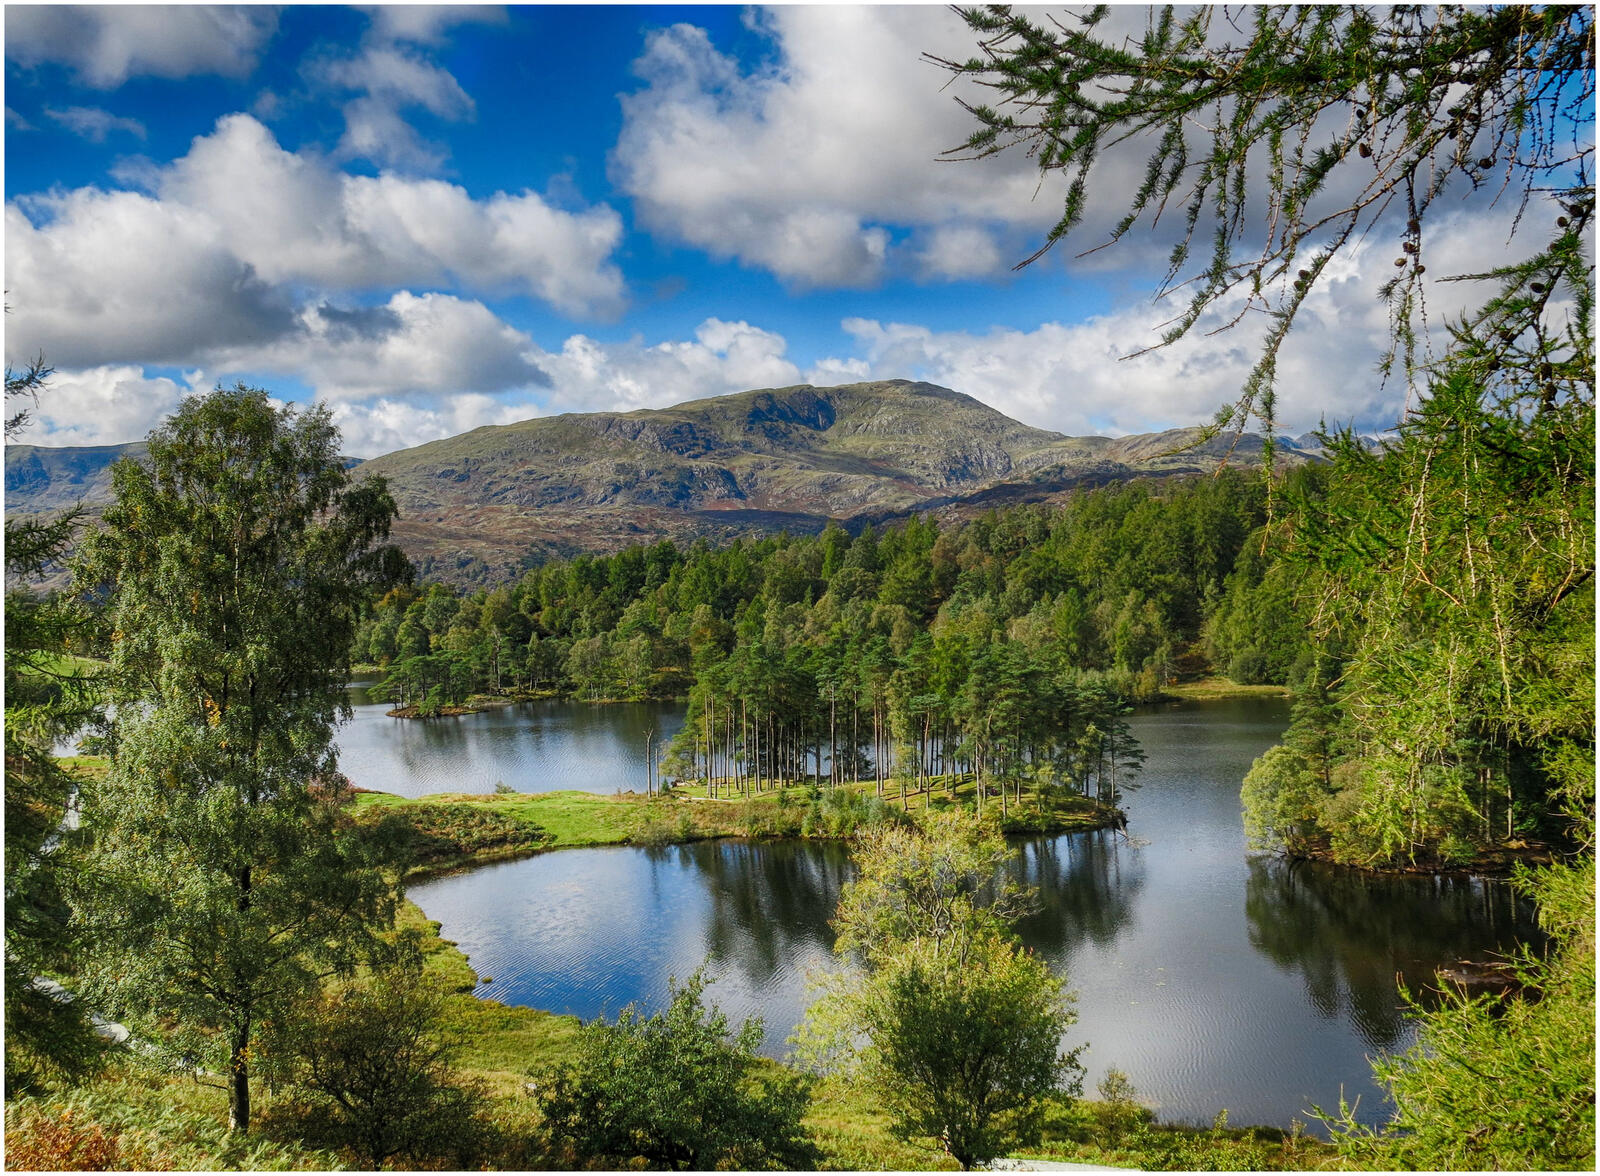 Wallpapers Lake District National Park the lake district North West England on the desktop